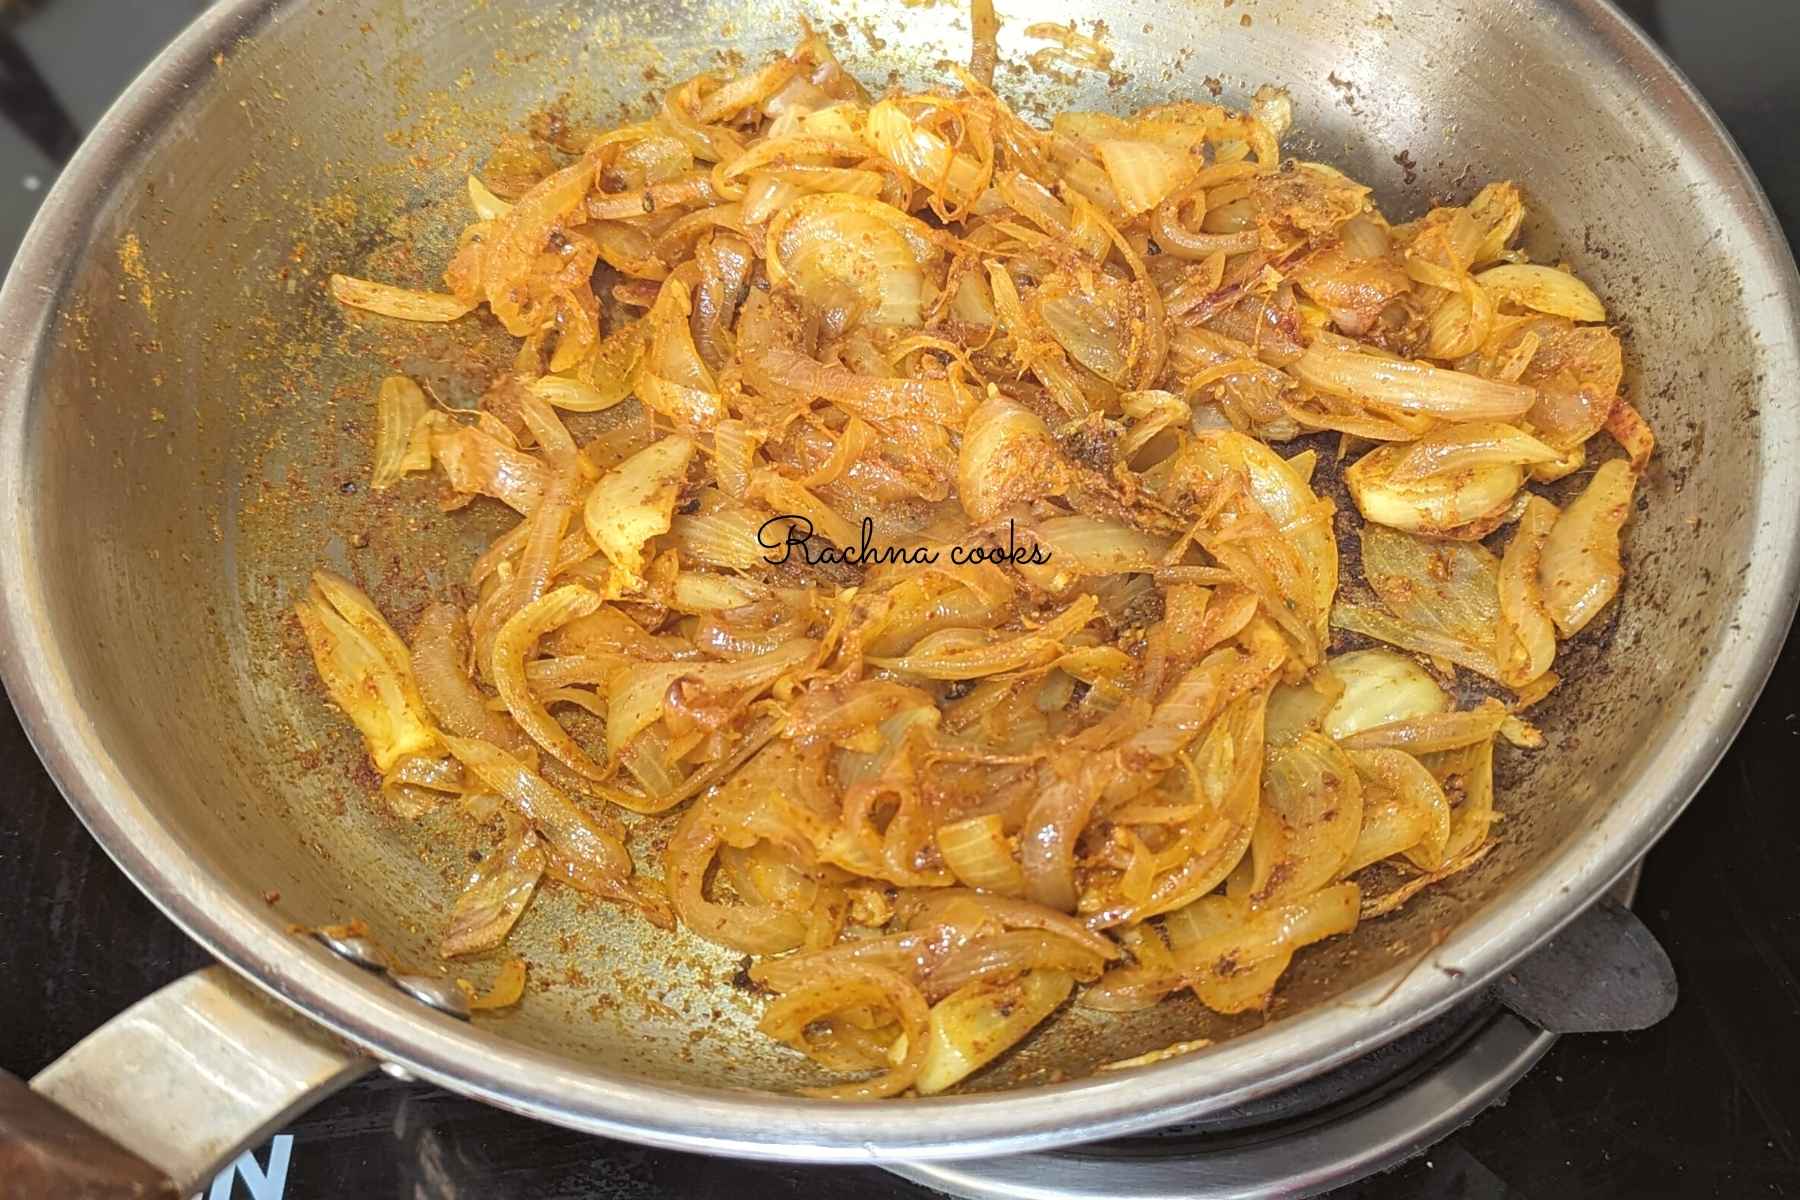 Sliced onion filling wth spices is ready in a pan